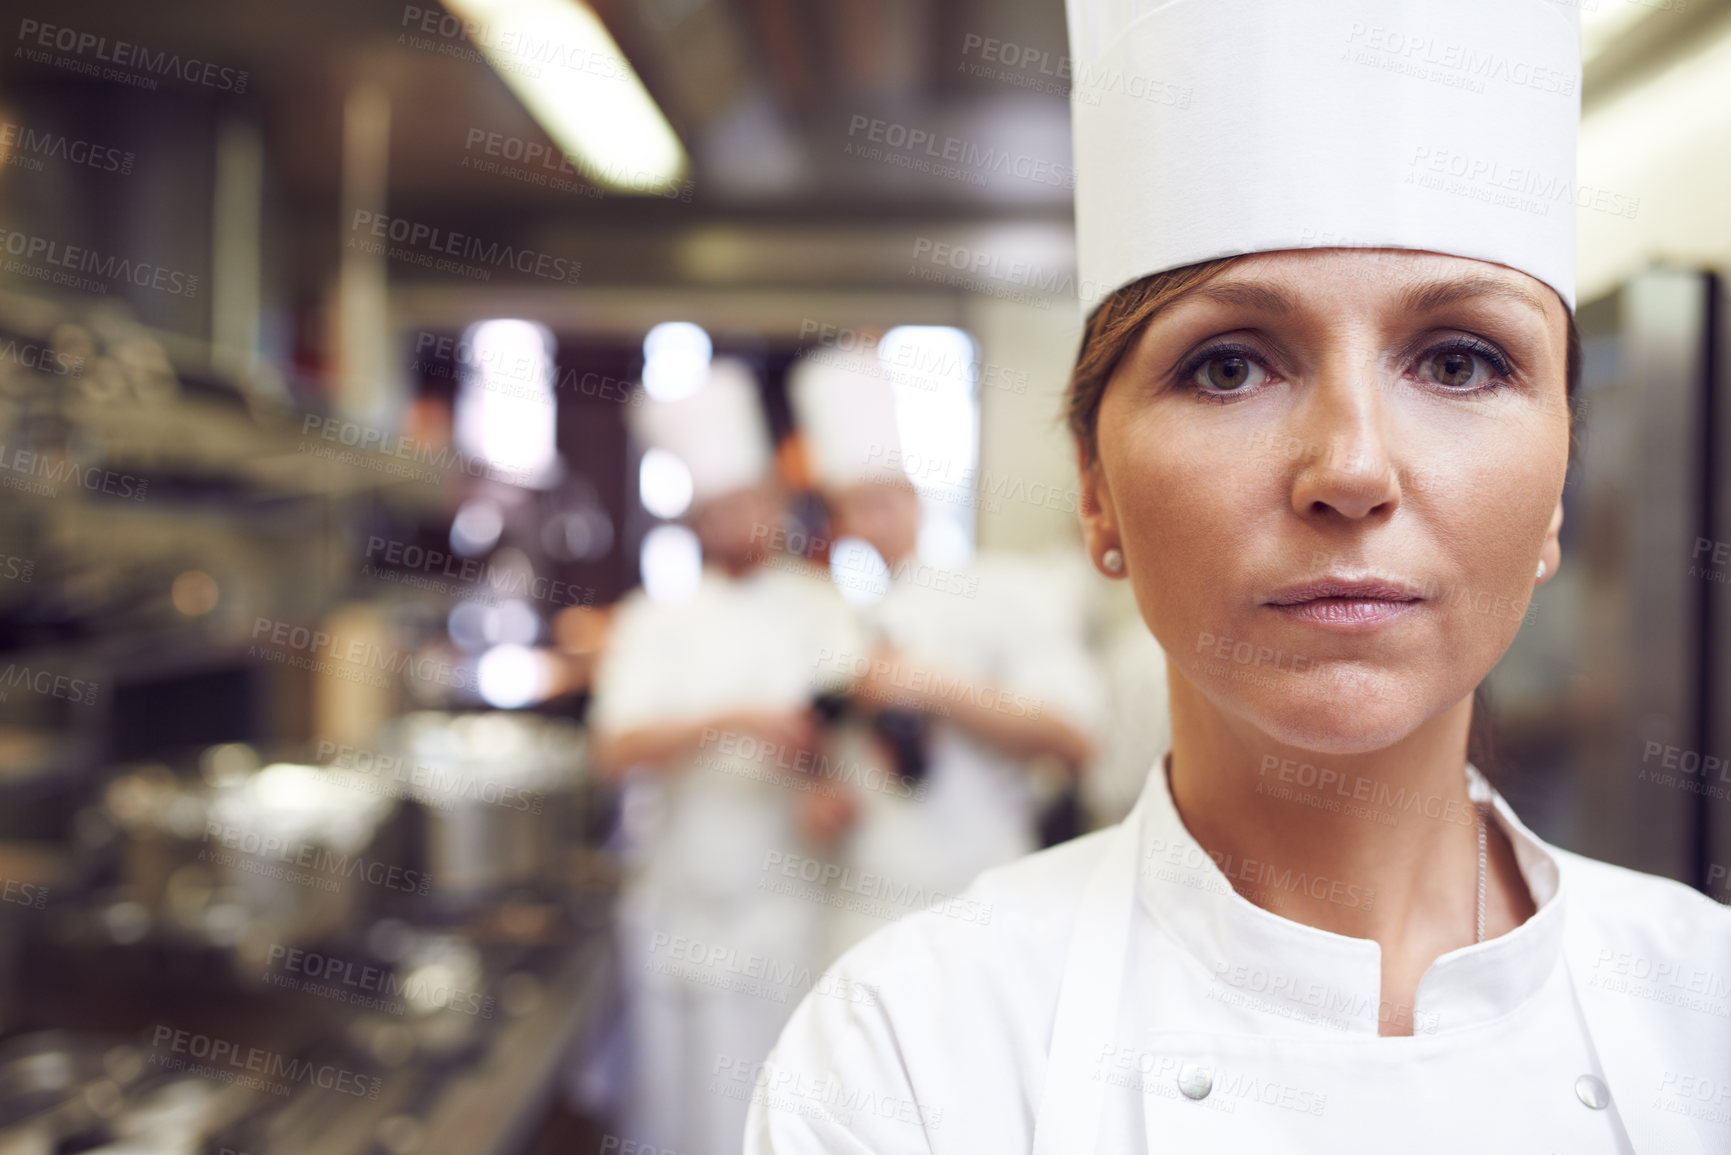 Buy stock photo Portrait of a chef in a professional kitchen